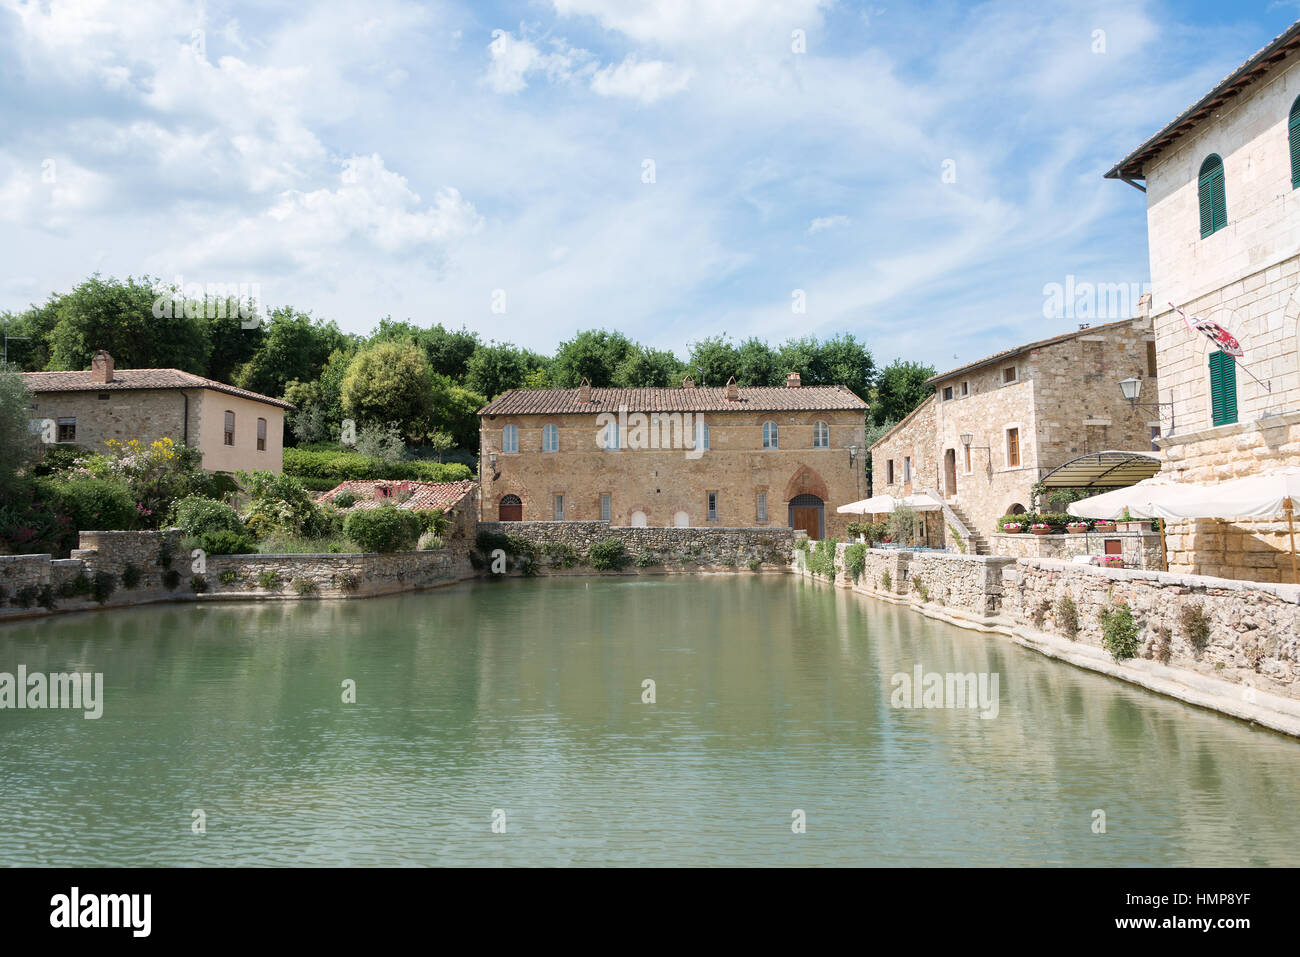 The hot spring bath or ancient Roman pool in the village center of Bagno Vignoni, a small town in the Val d’Orcia valley in Tuscany, Italy. Stock Photo